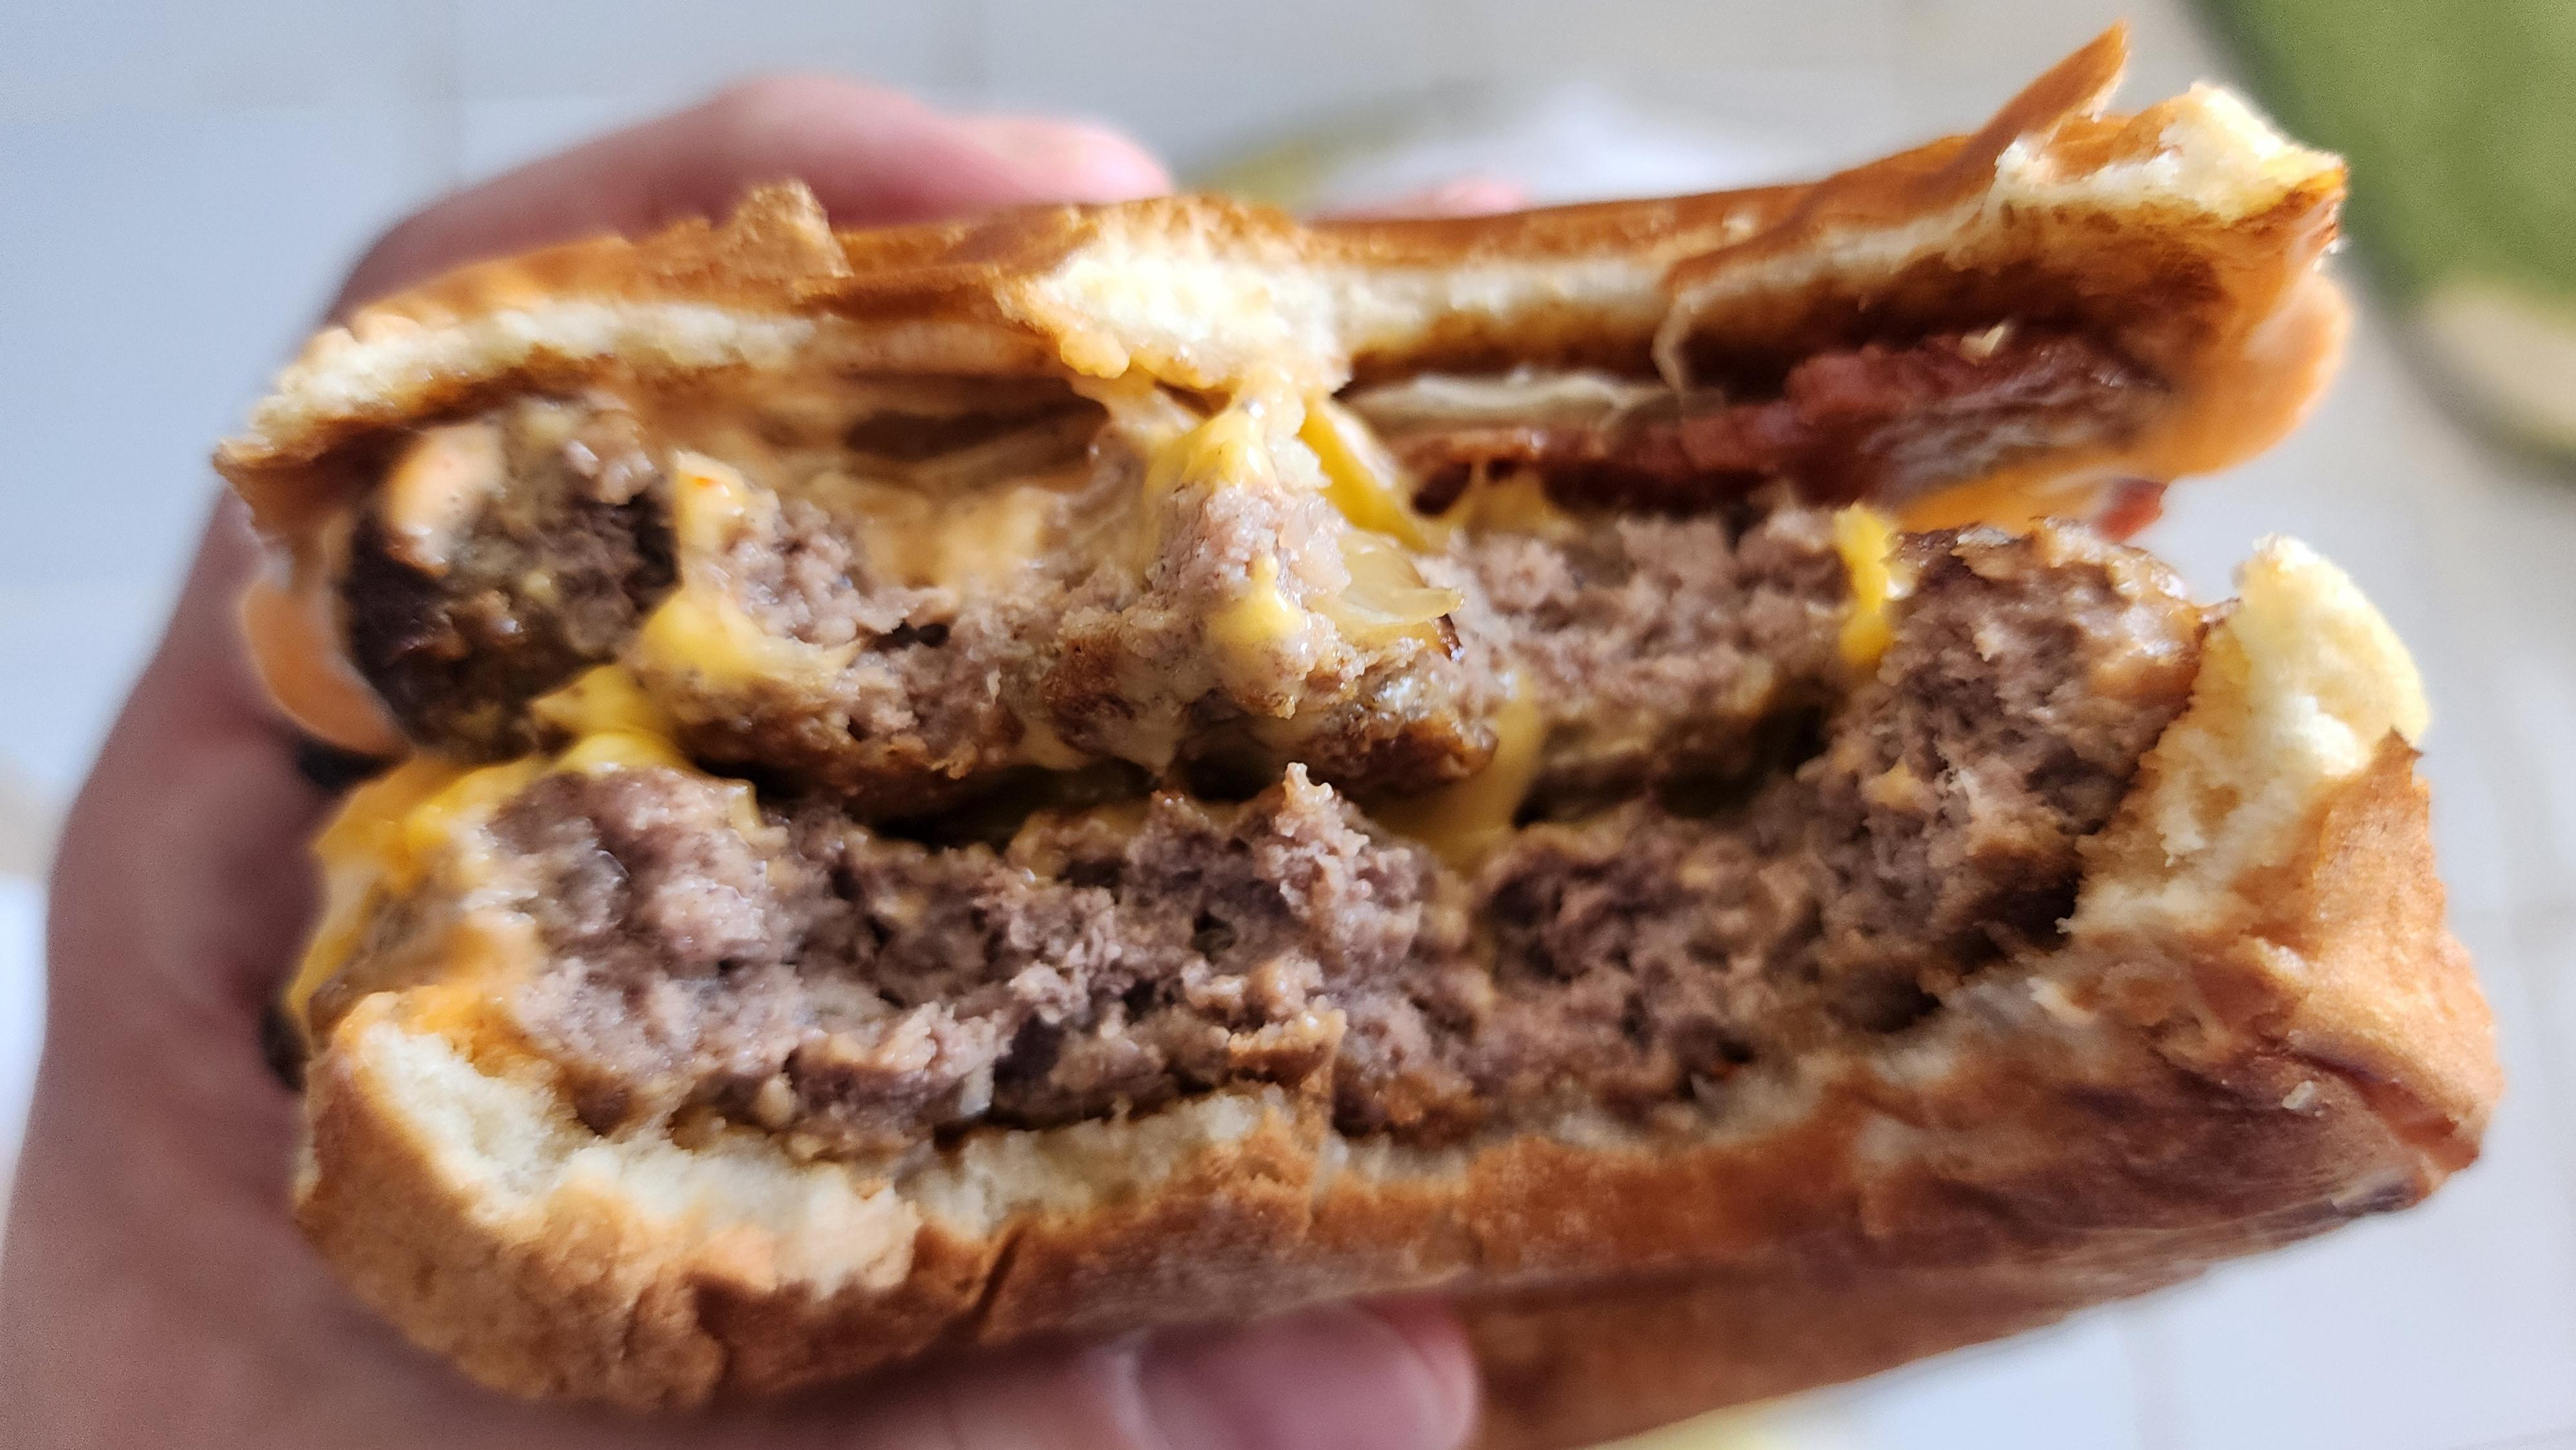 Burger bitten to show cross-section of the two burger patties